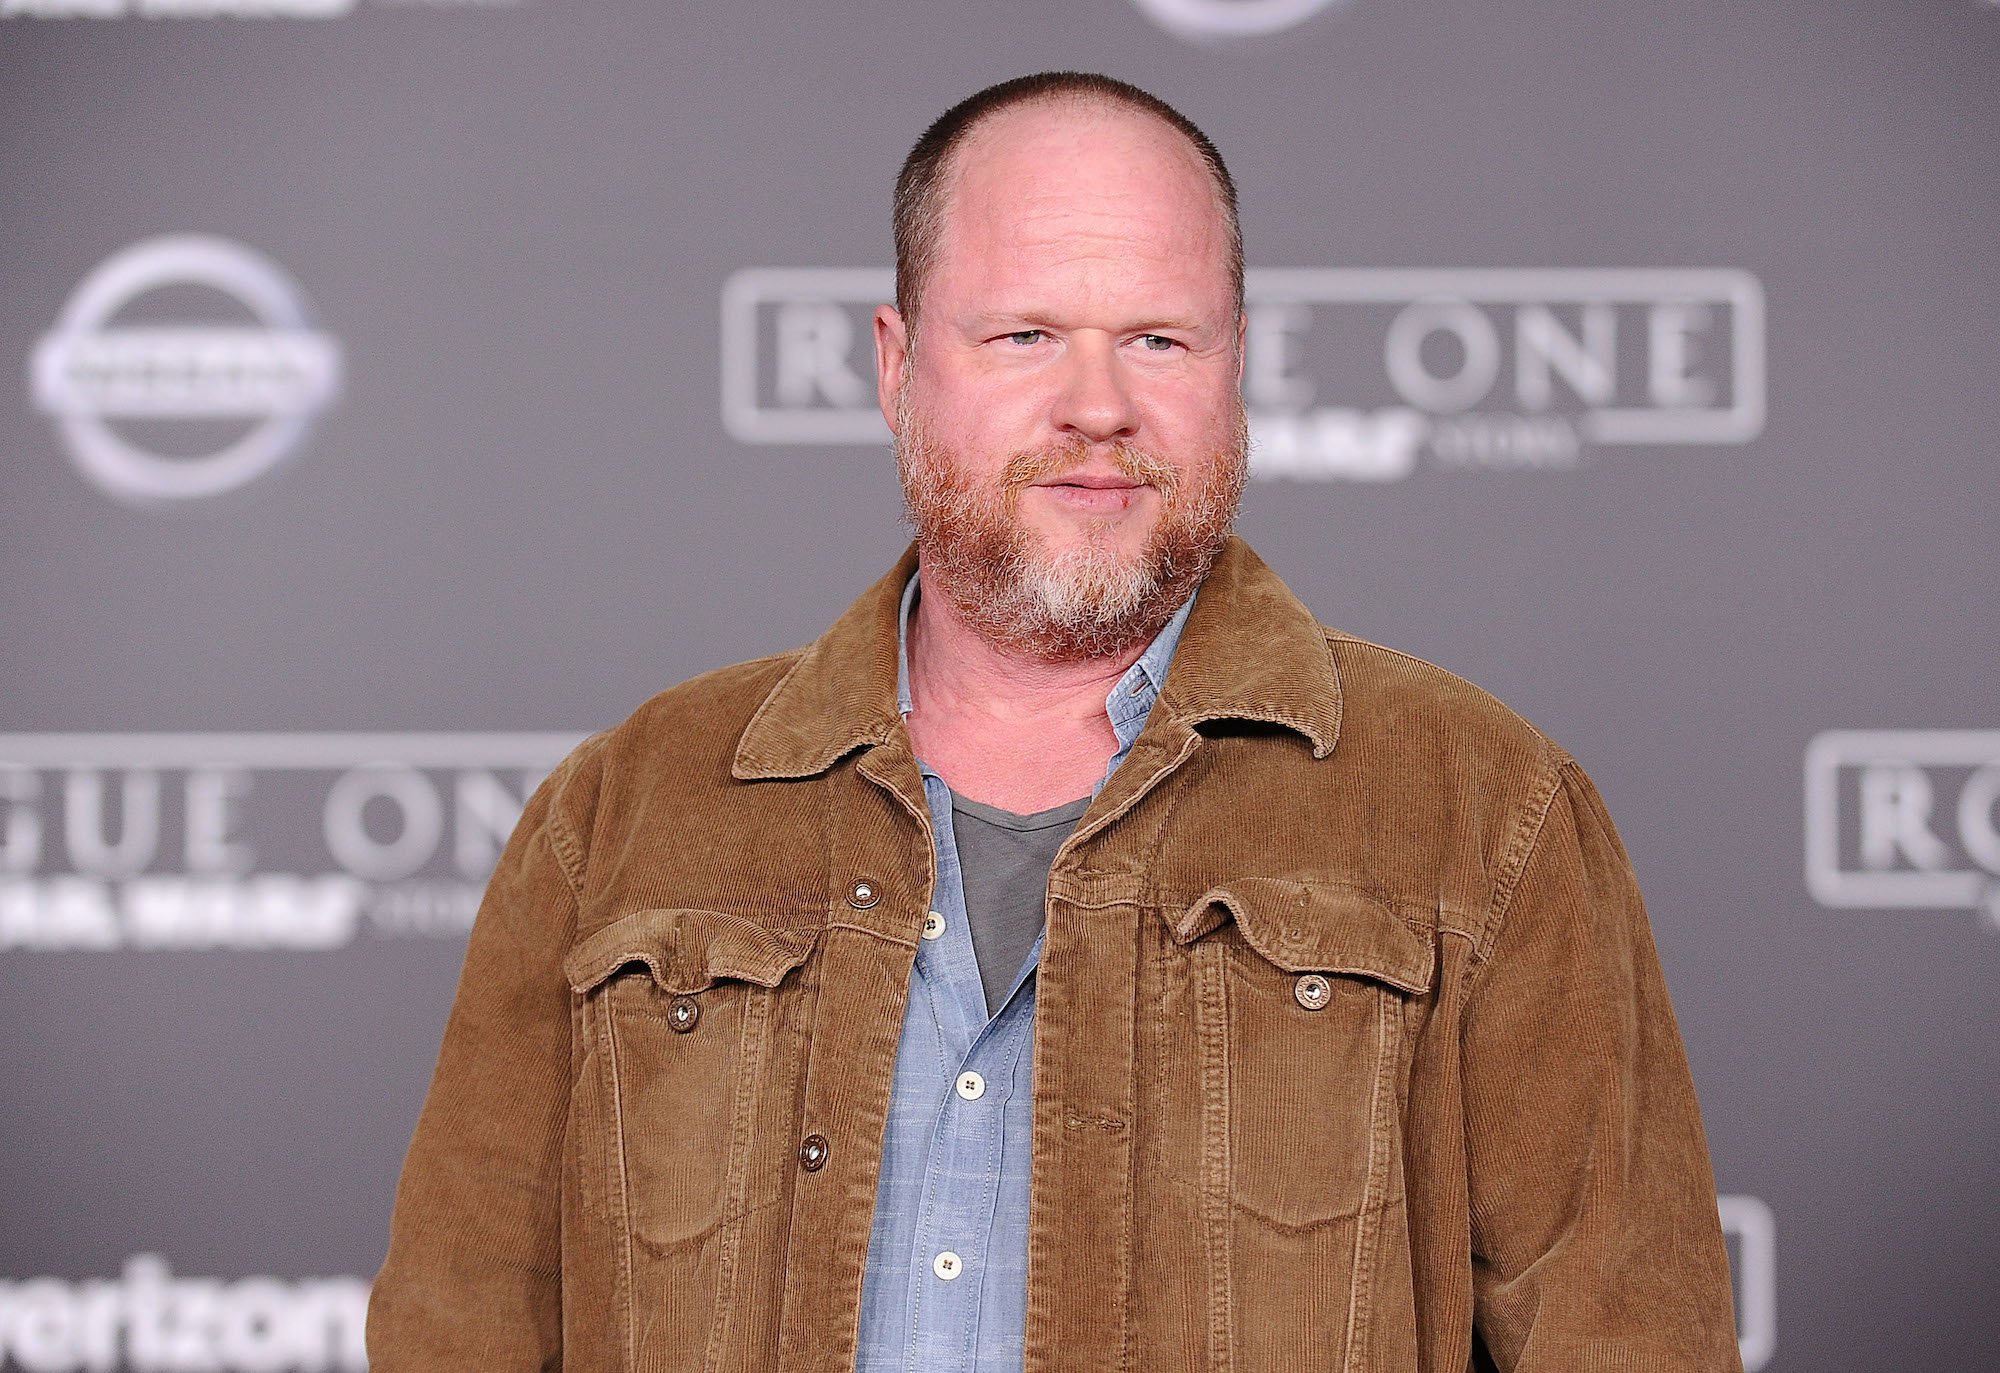 Joss Whedon’s Abuse Accusations Grow Following ‘Justice League’ Whistleblower